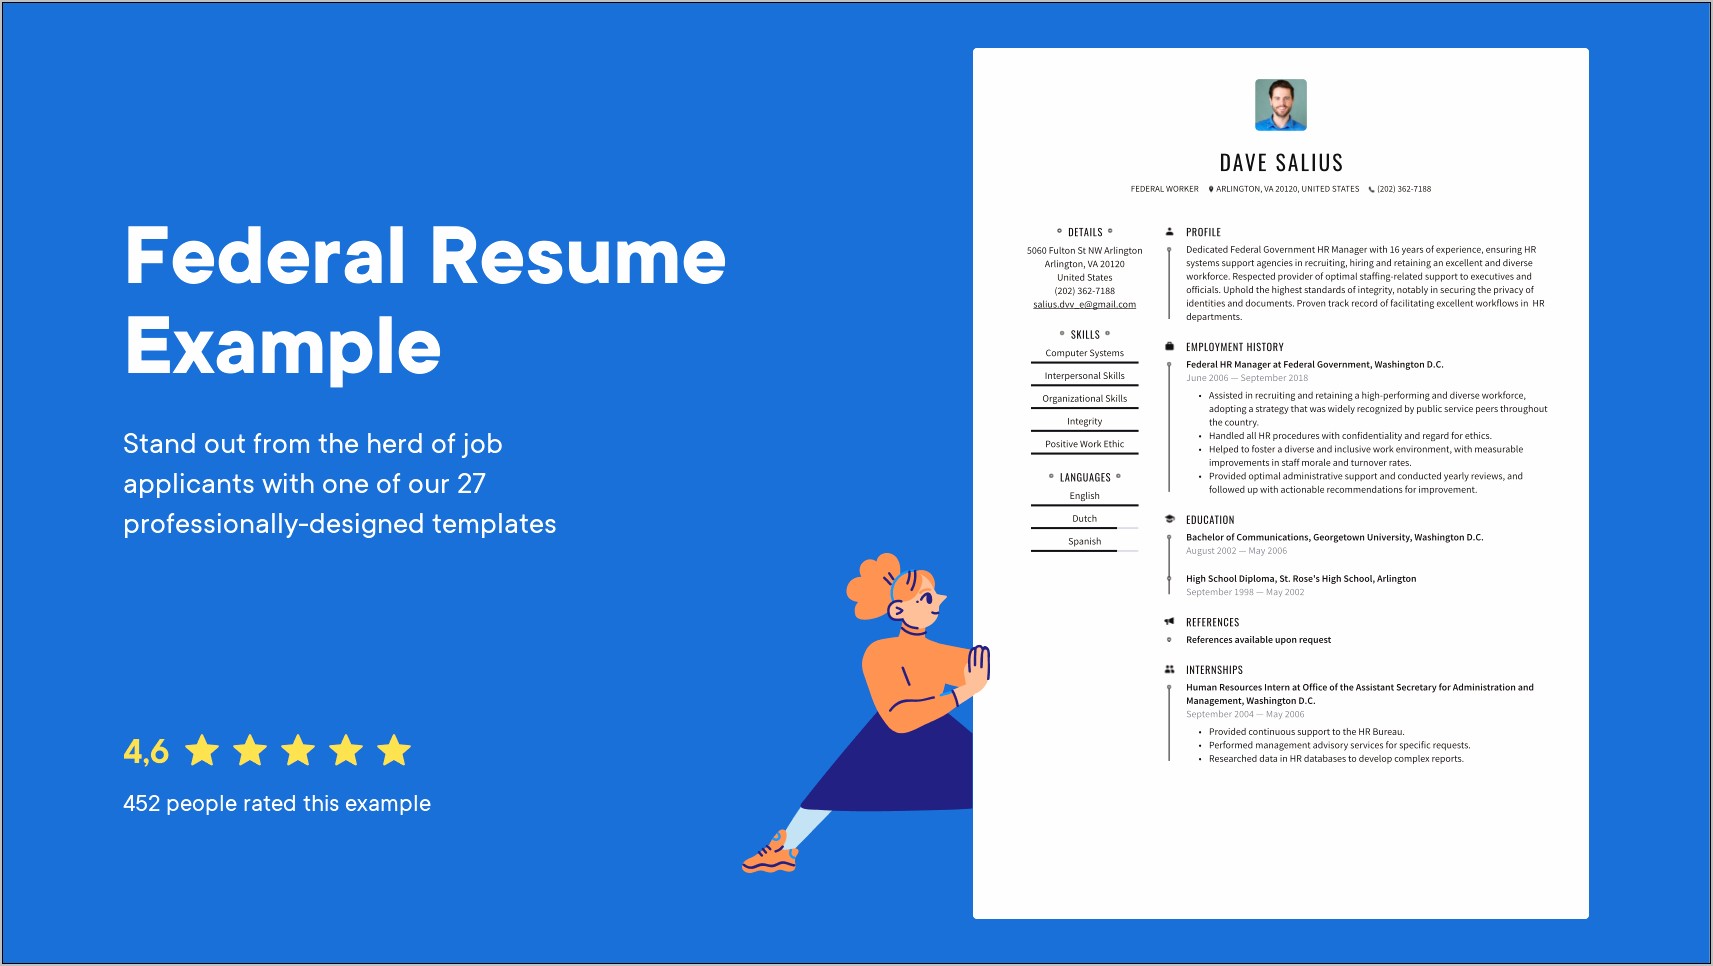 Federal Resume Gs 11 Example